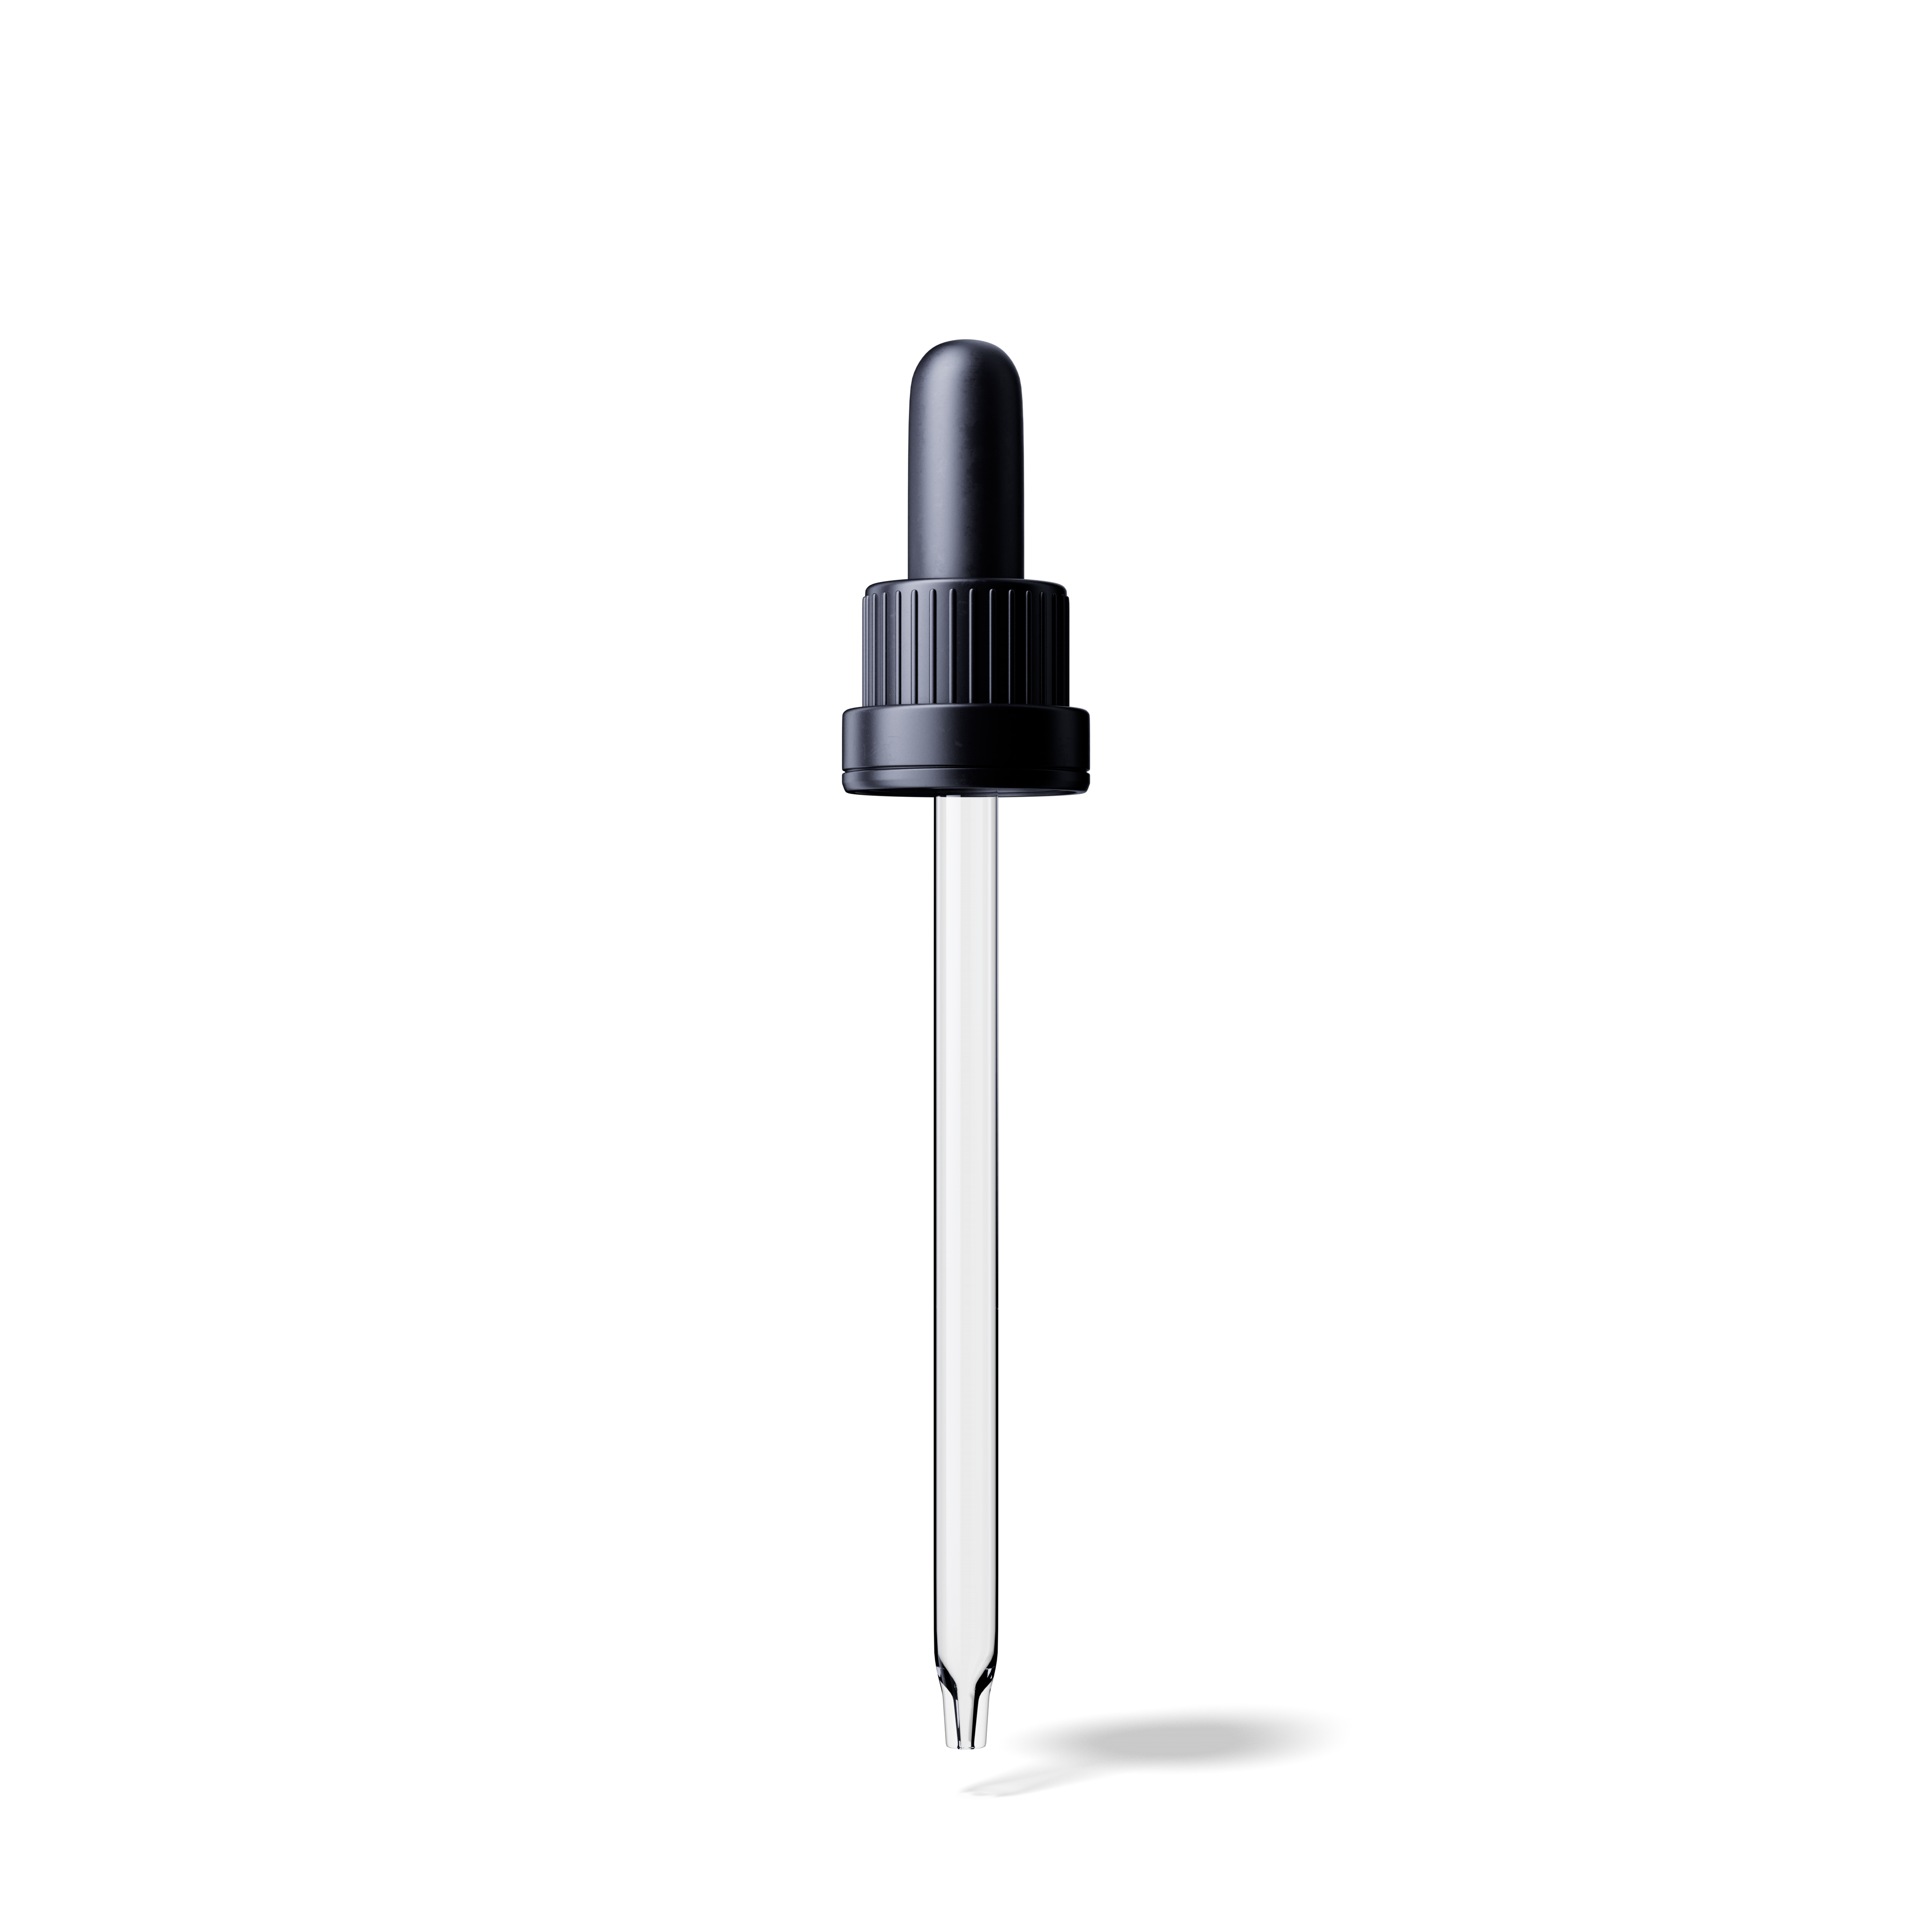 Pipette tamper evident DIN18, III, black, ribbed, bulb TPE, dose 1.0ml, conical tip (Orion 60)